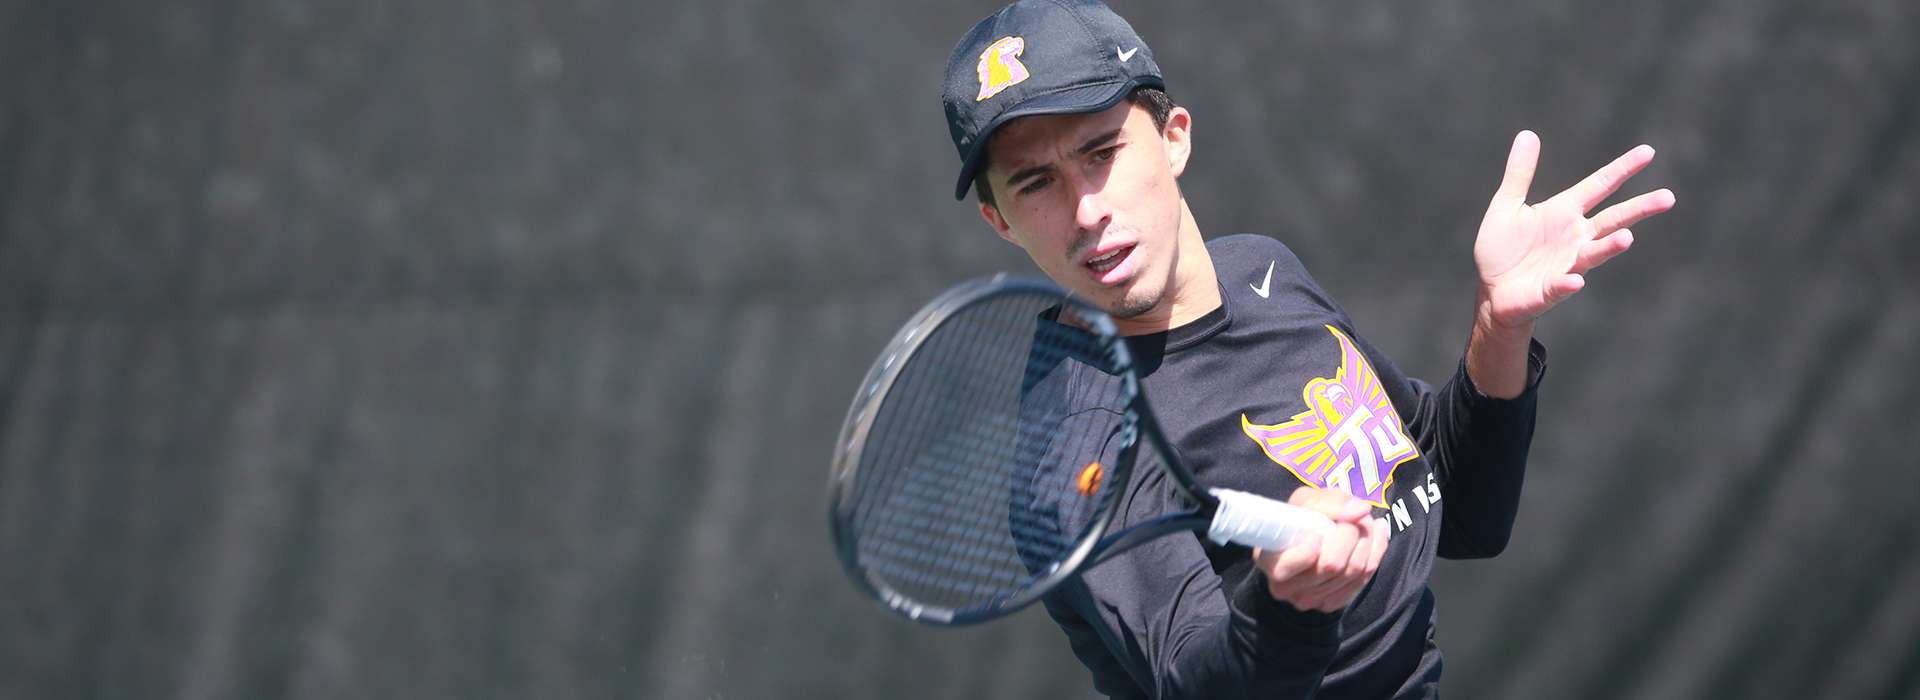 Golden Eagles use strong singles performance to pick up win over Austin Peay in home finale